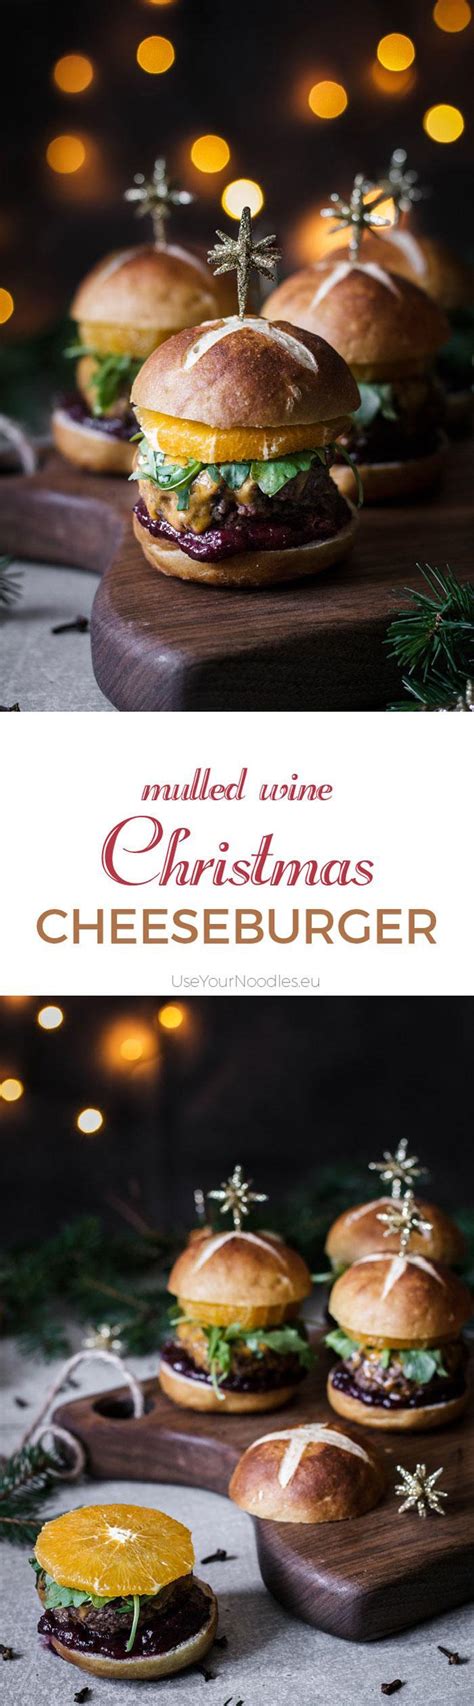 Mulled Wine Christmas Cheeseburger Use Your Noodles